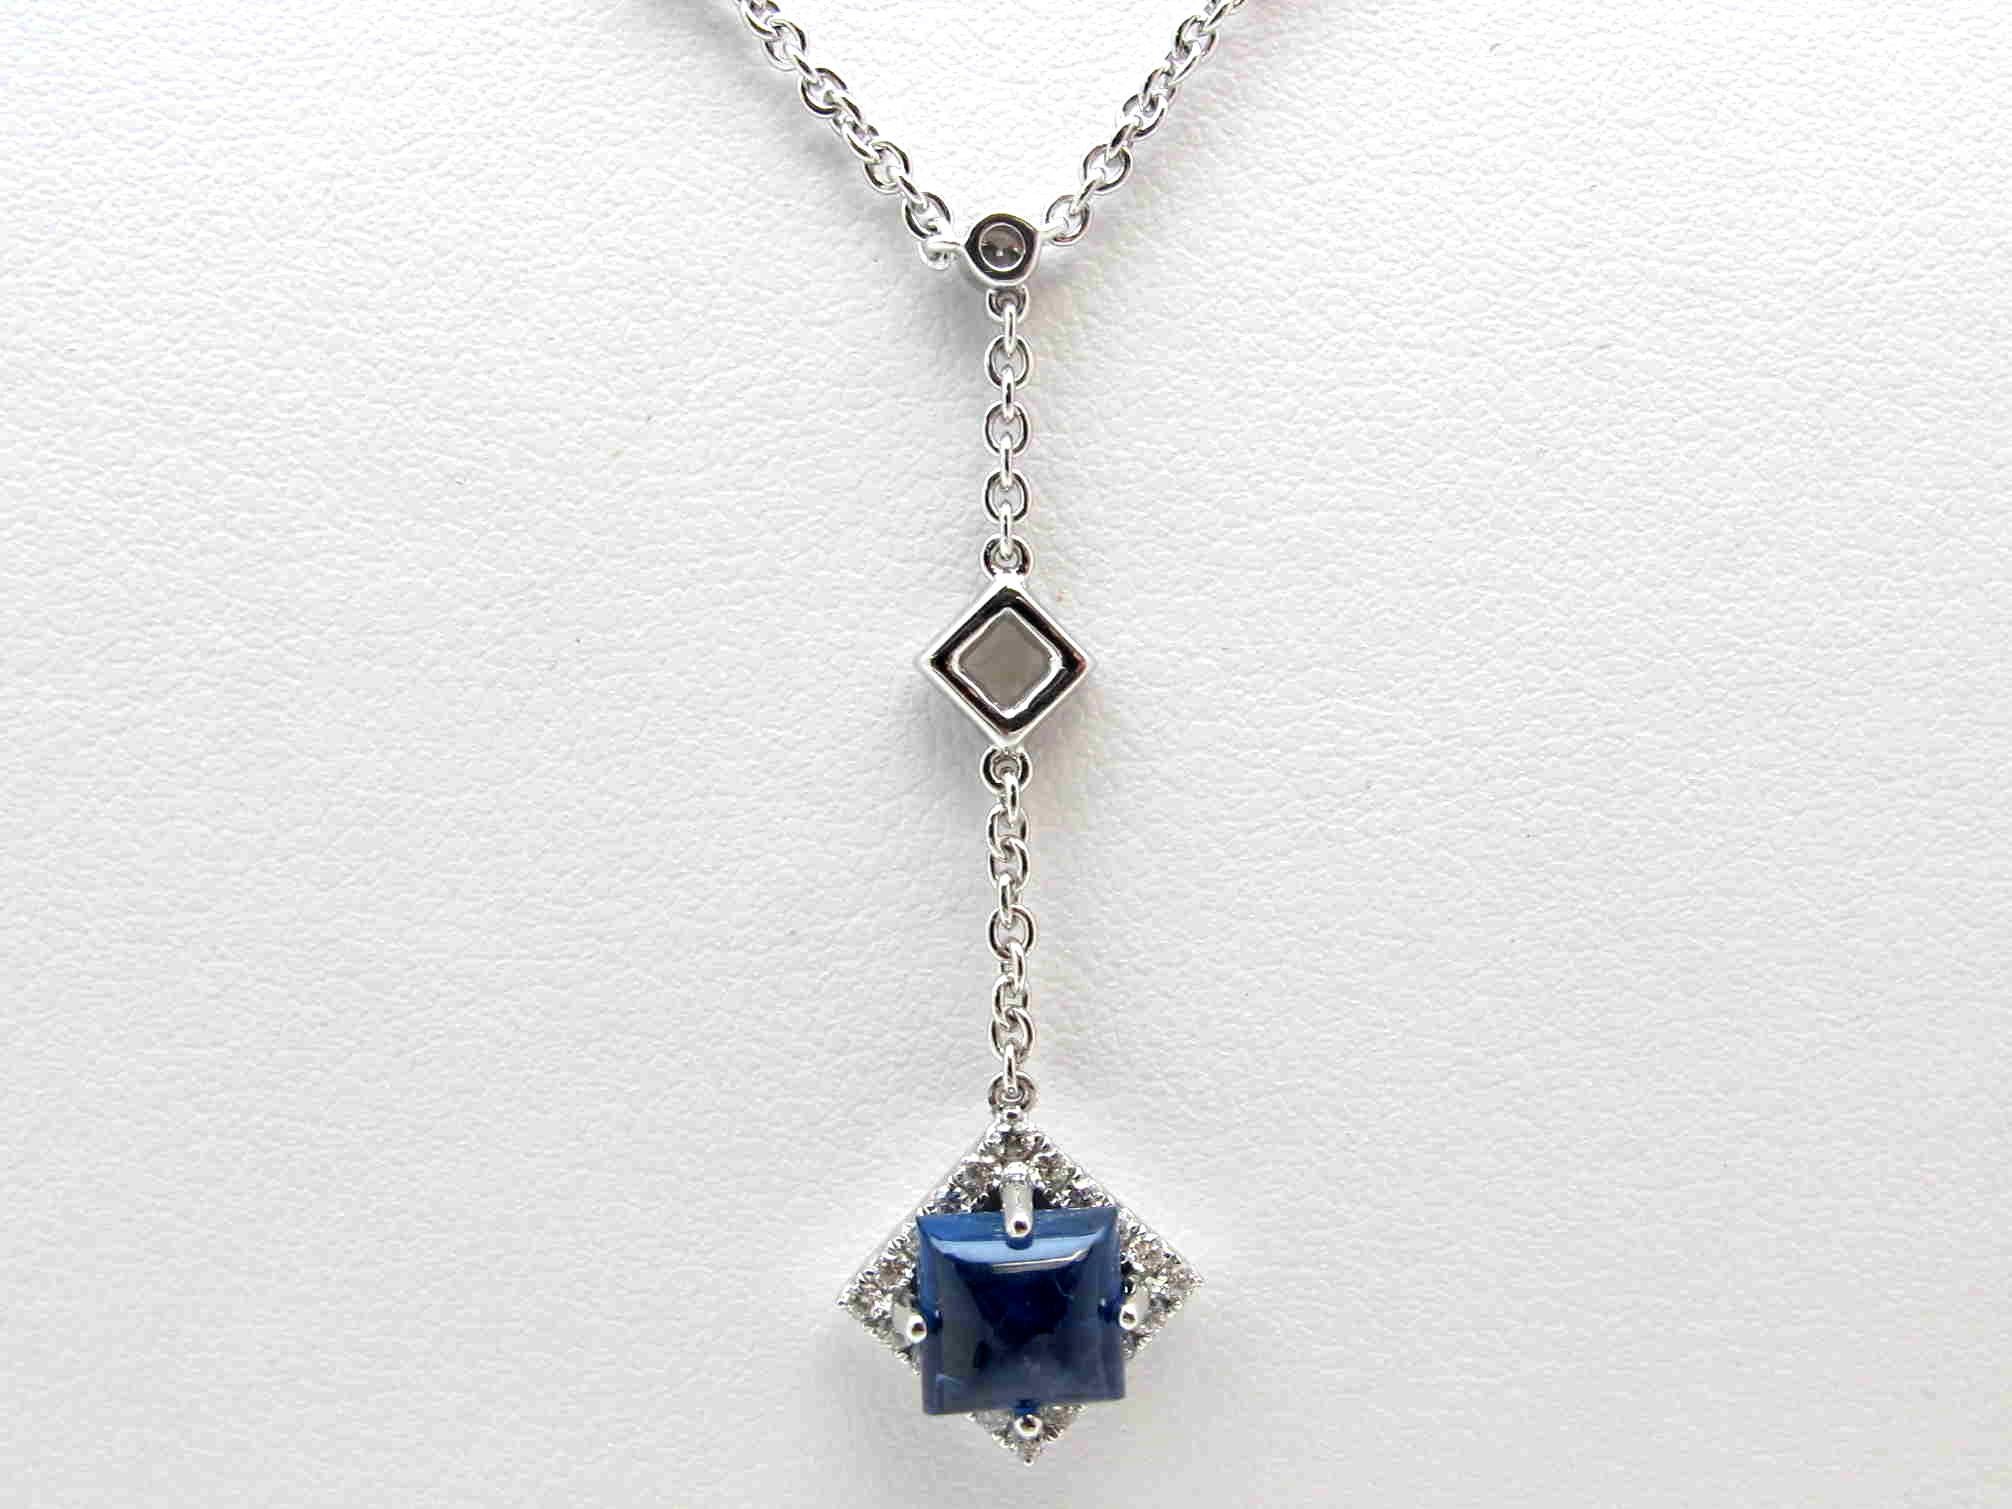 Stylish and elegant, this diamond and sapphire drop necklace is absolutely beautiful! Sometimes less is more, and that is evident in the masterful creation of this piece. This necklace is set with a deep blue sapphire cabochon and fine quality